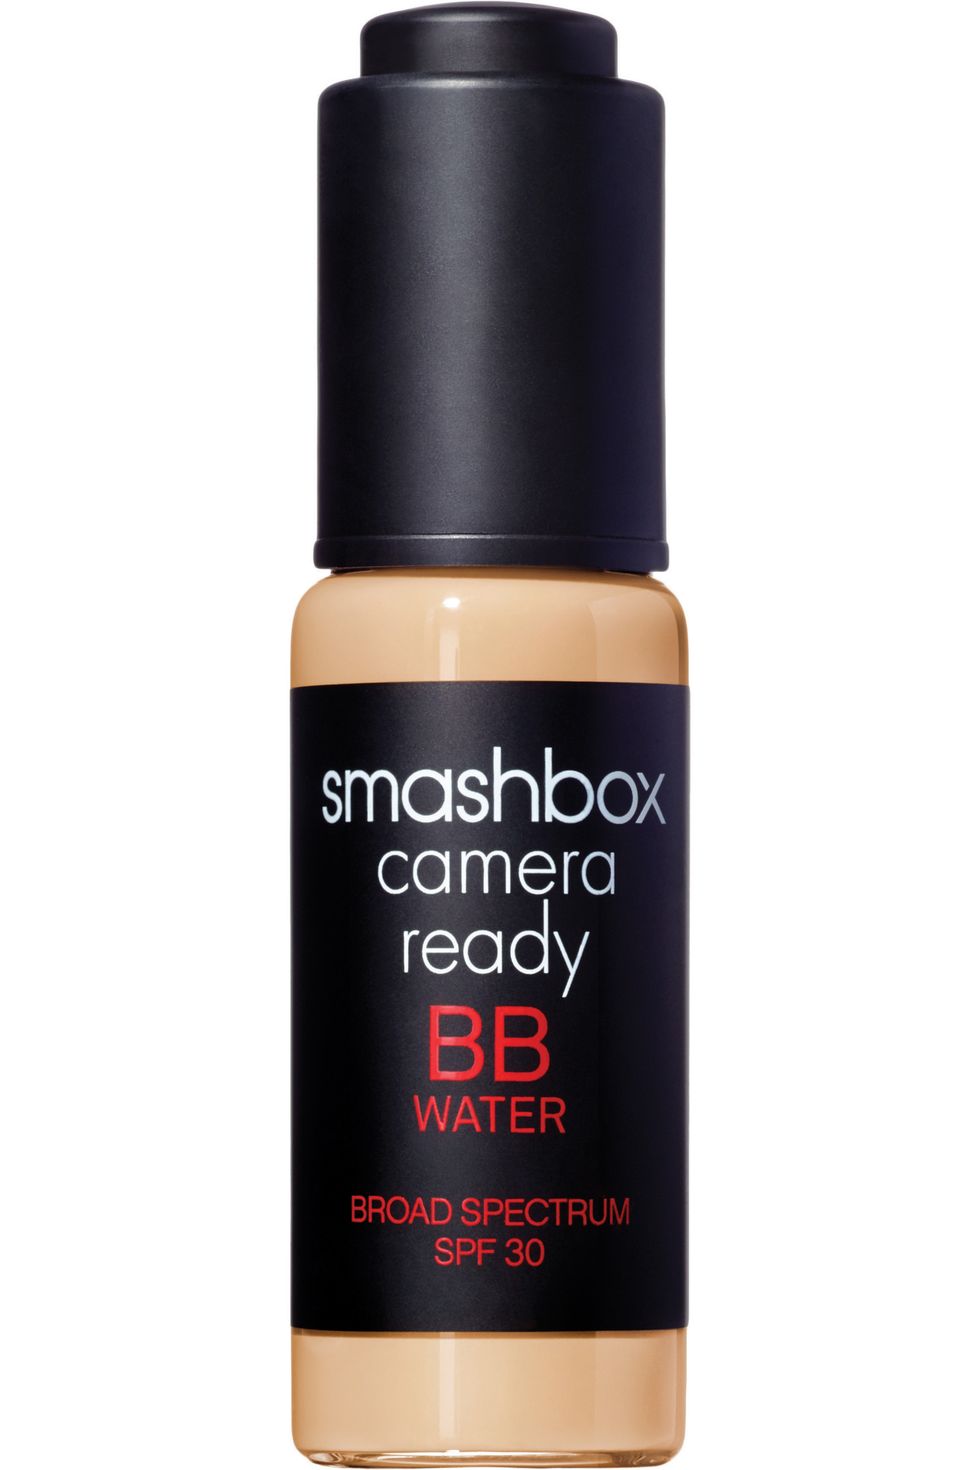 <p>Silky-sheer but buildable and with SPF 30, so you're covered for a day in the sun. </p><p><strong>Smashbox</strong> Camera Ready BB Water Broad Spectrum SPF 30, $42, <a href="http://www.sephora.com/camera-ready-bb-water-broad-spectrum-spf-30-P398371" target="_blank">sephora.com</a>.</p>